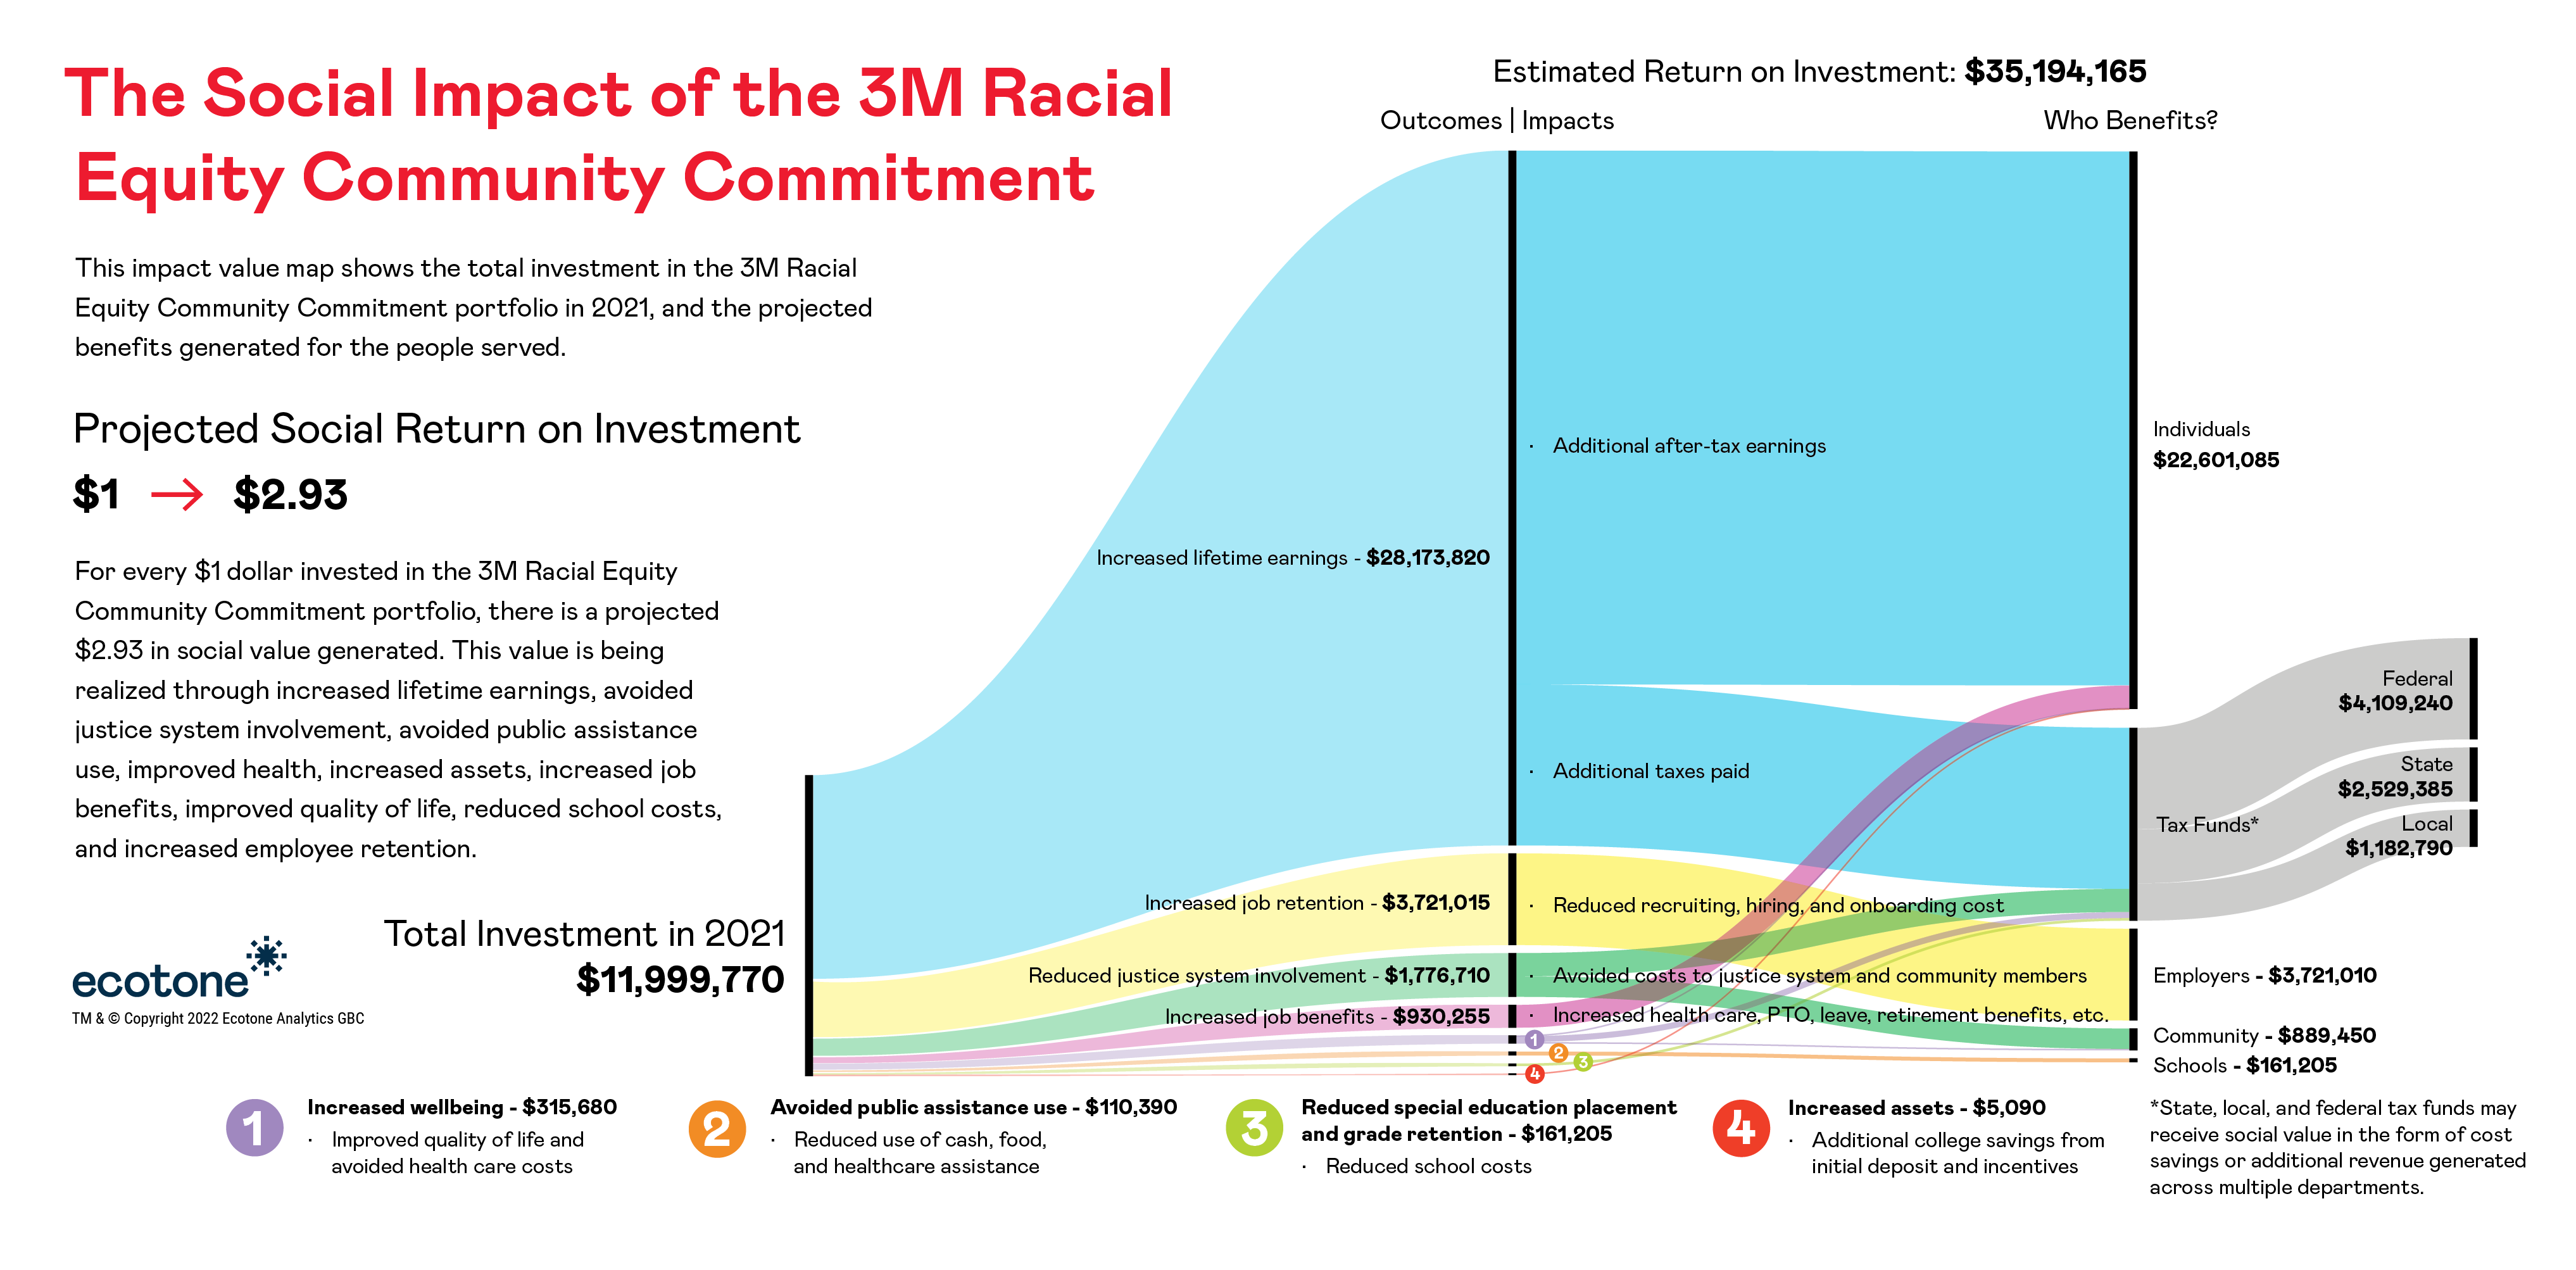 Social Impact of 3M Racial Equity Community Commitment infographic.